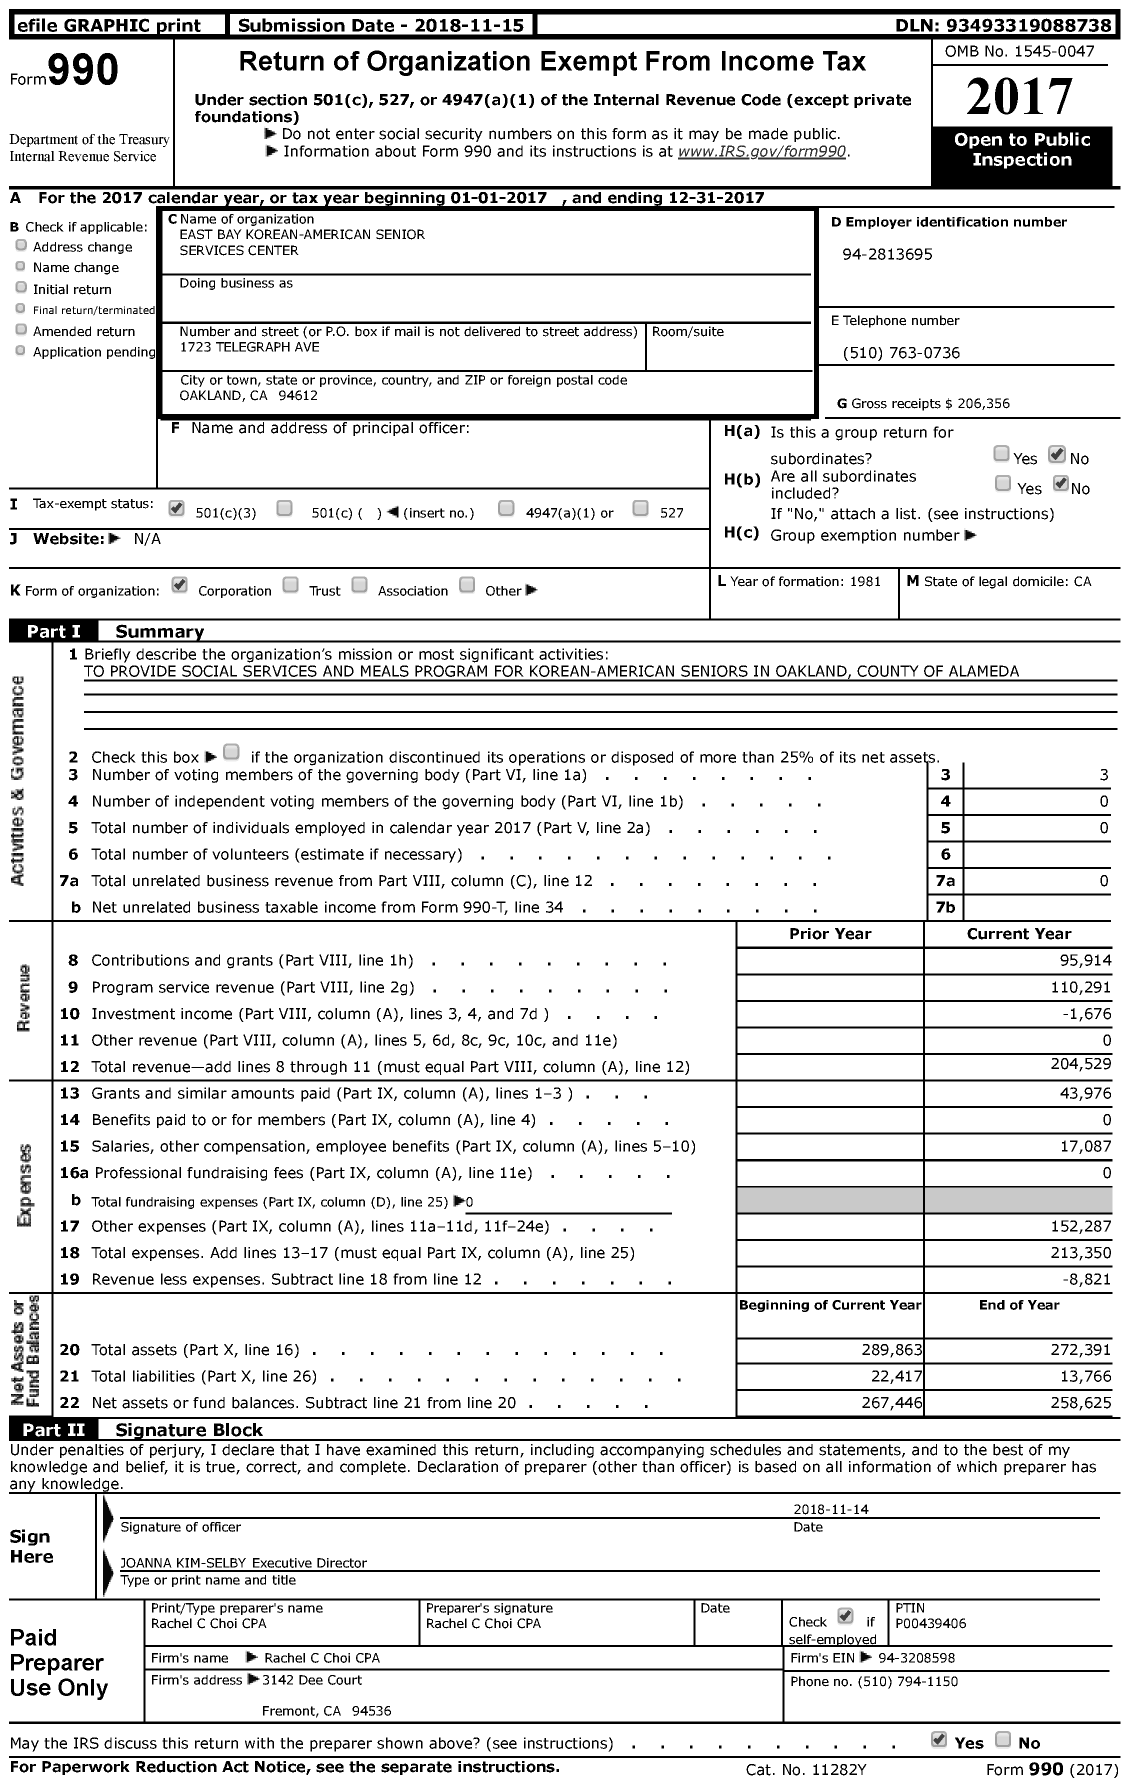 Image of first page of 2017 Form 990 for East Bay Korean-American Senior Services Center